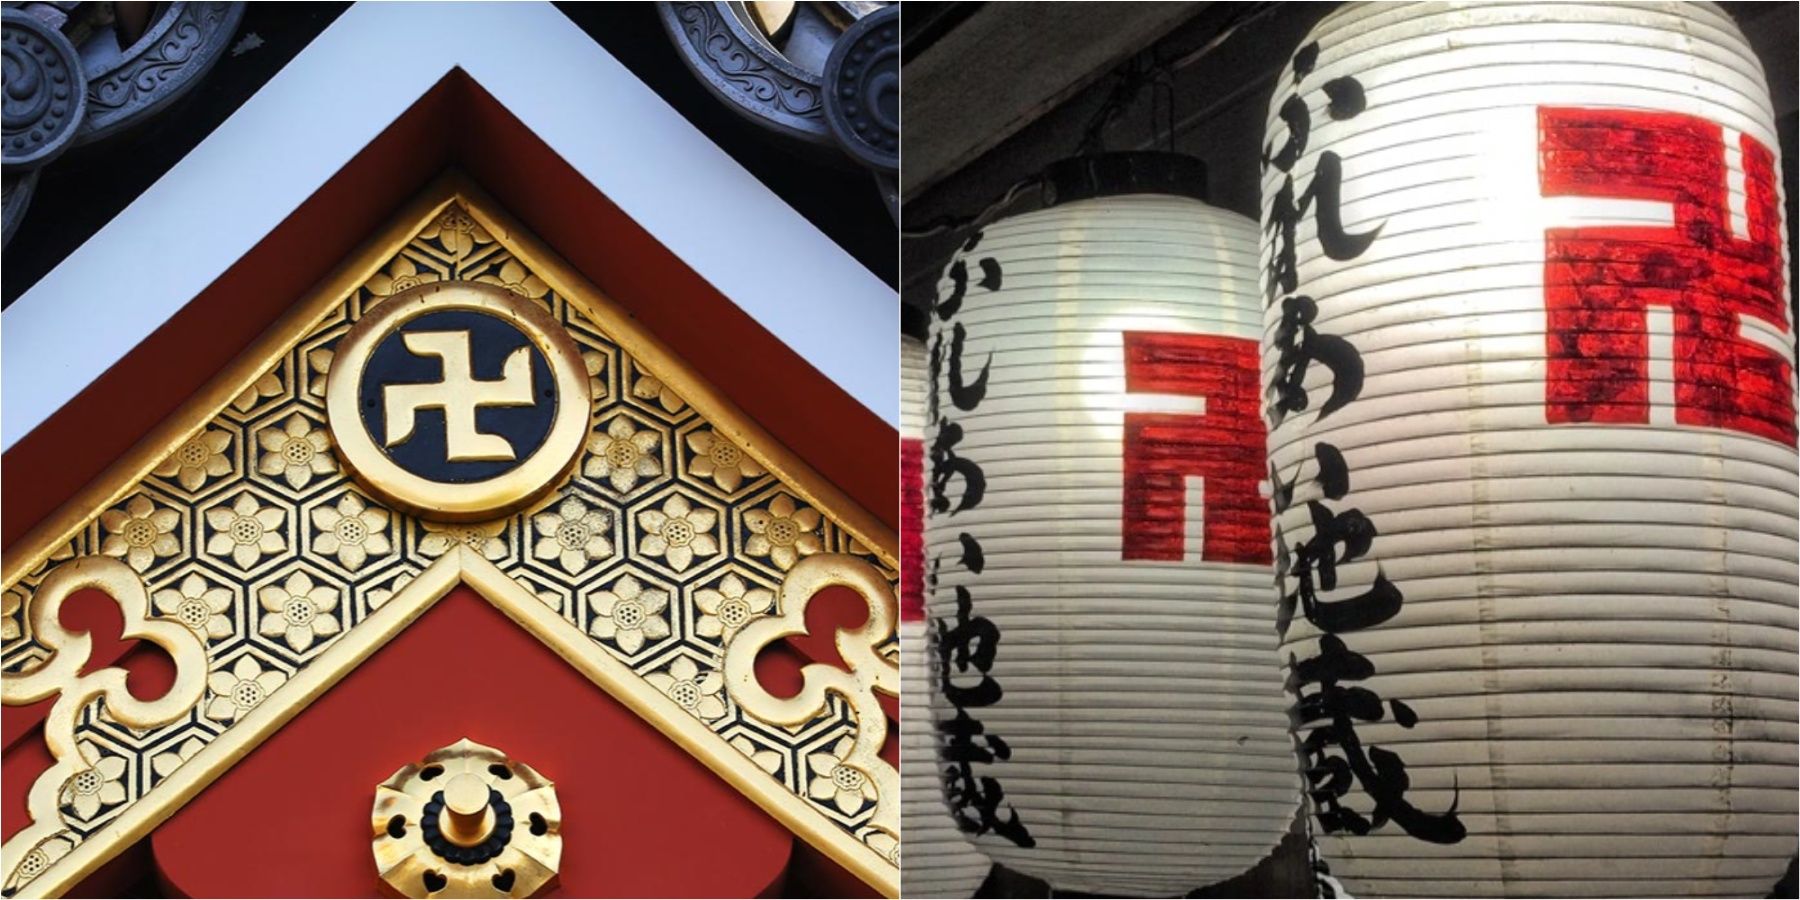 Swastika in Japanese Religions